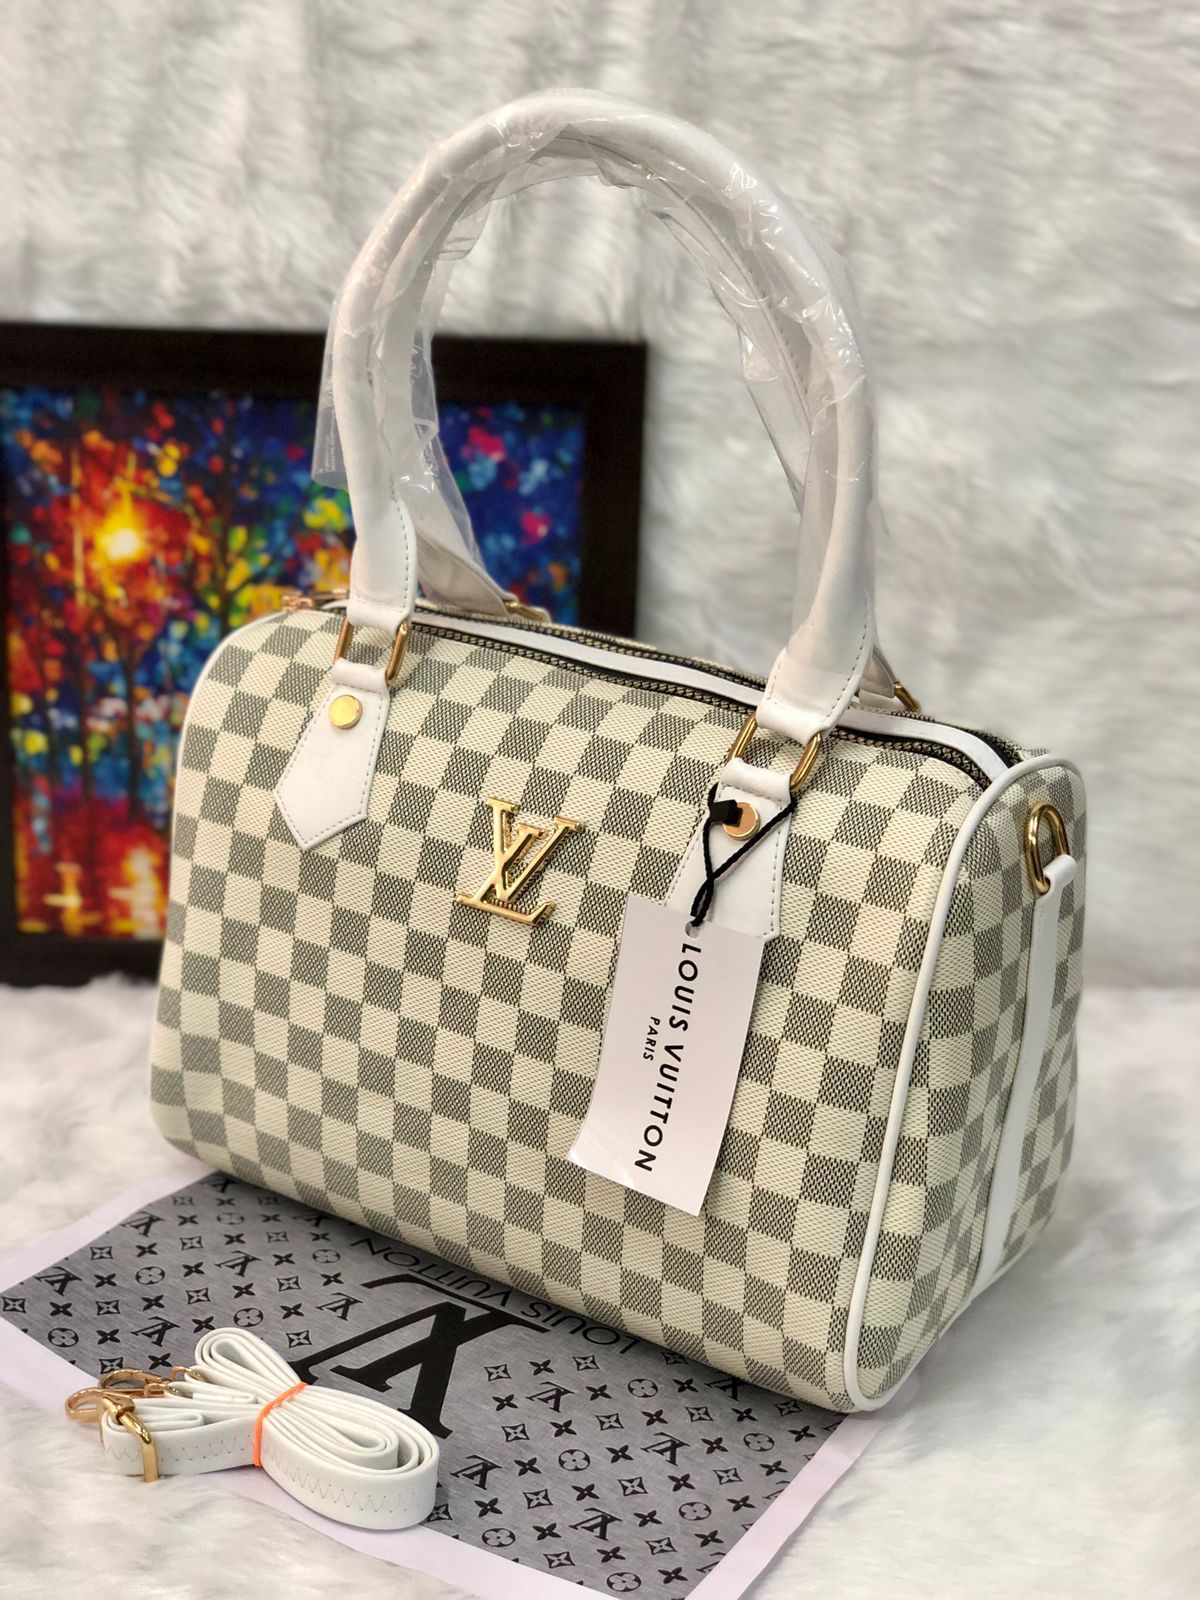 Louis Vuitton Best Quality Handbag LV Checks In White Color Speedy Mini Monogram  Bag Canvas Leather Duffle Collection With Sling Belt Best Quality Bag For  Women's Or Girls - LV-DF-M44 - Husky